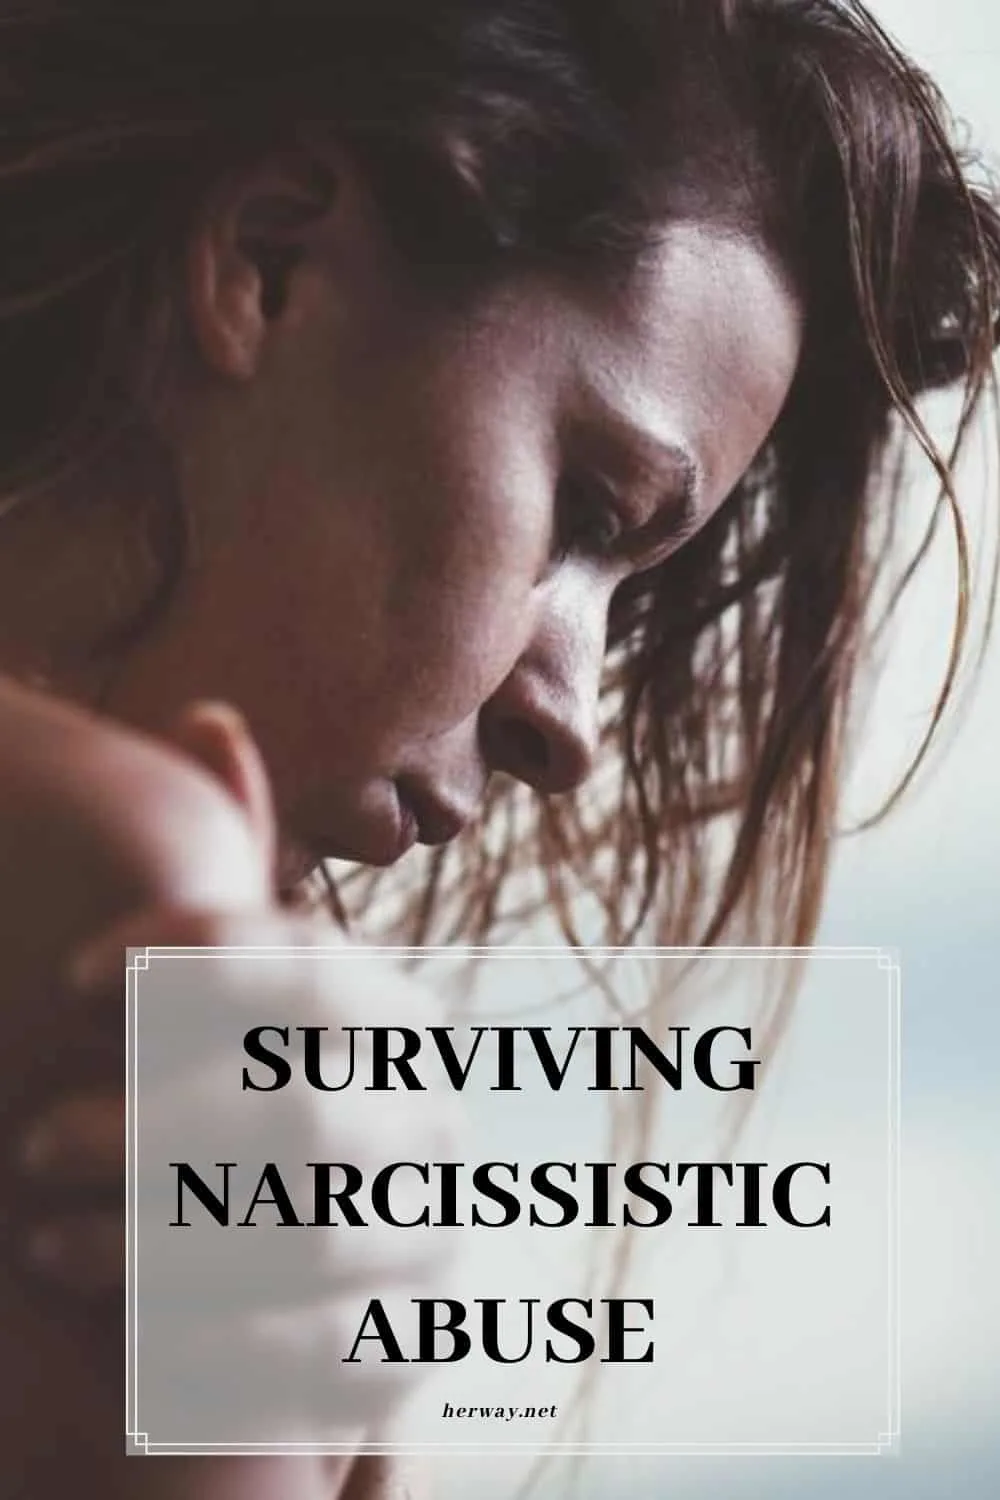 Surviving Narcissistic Abuse